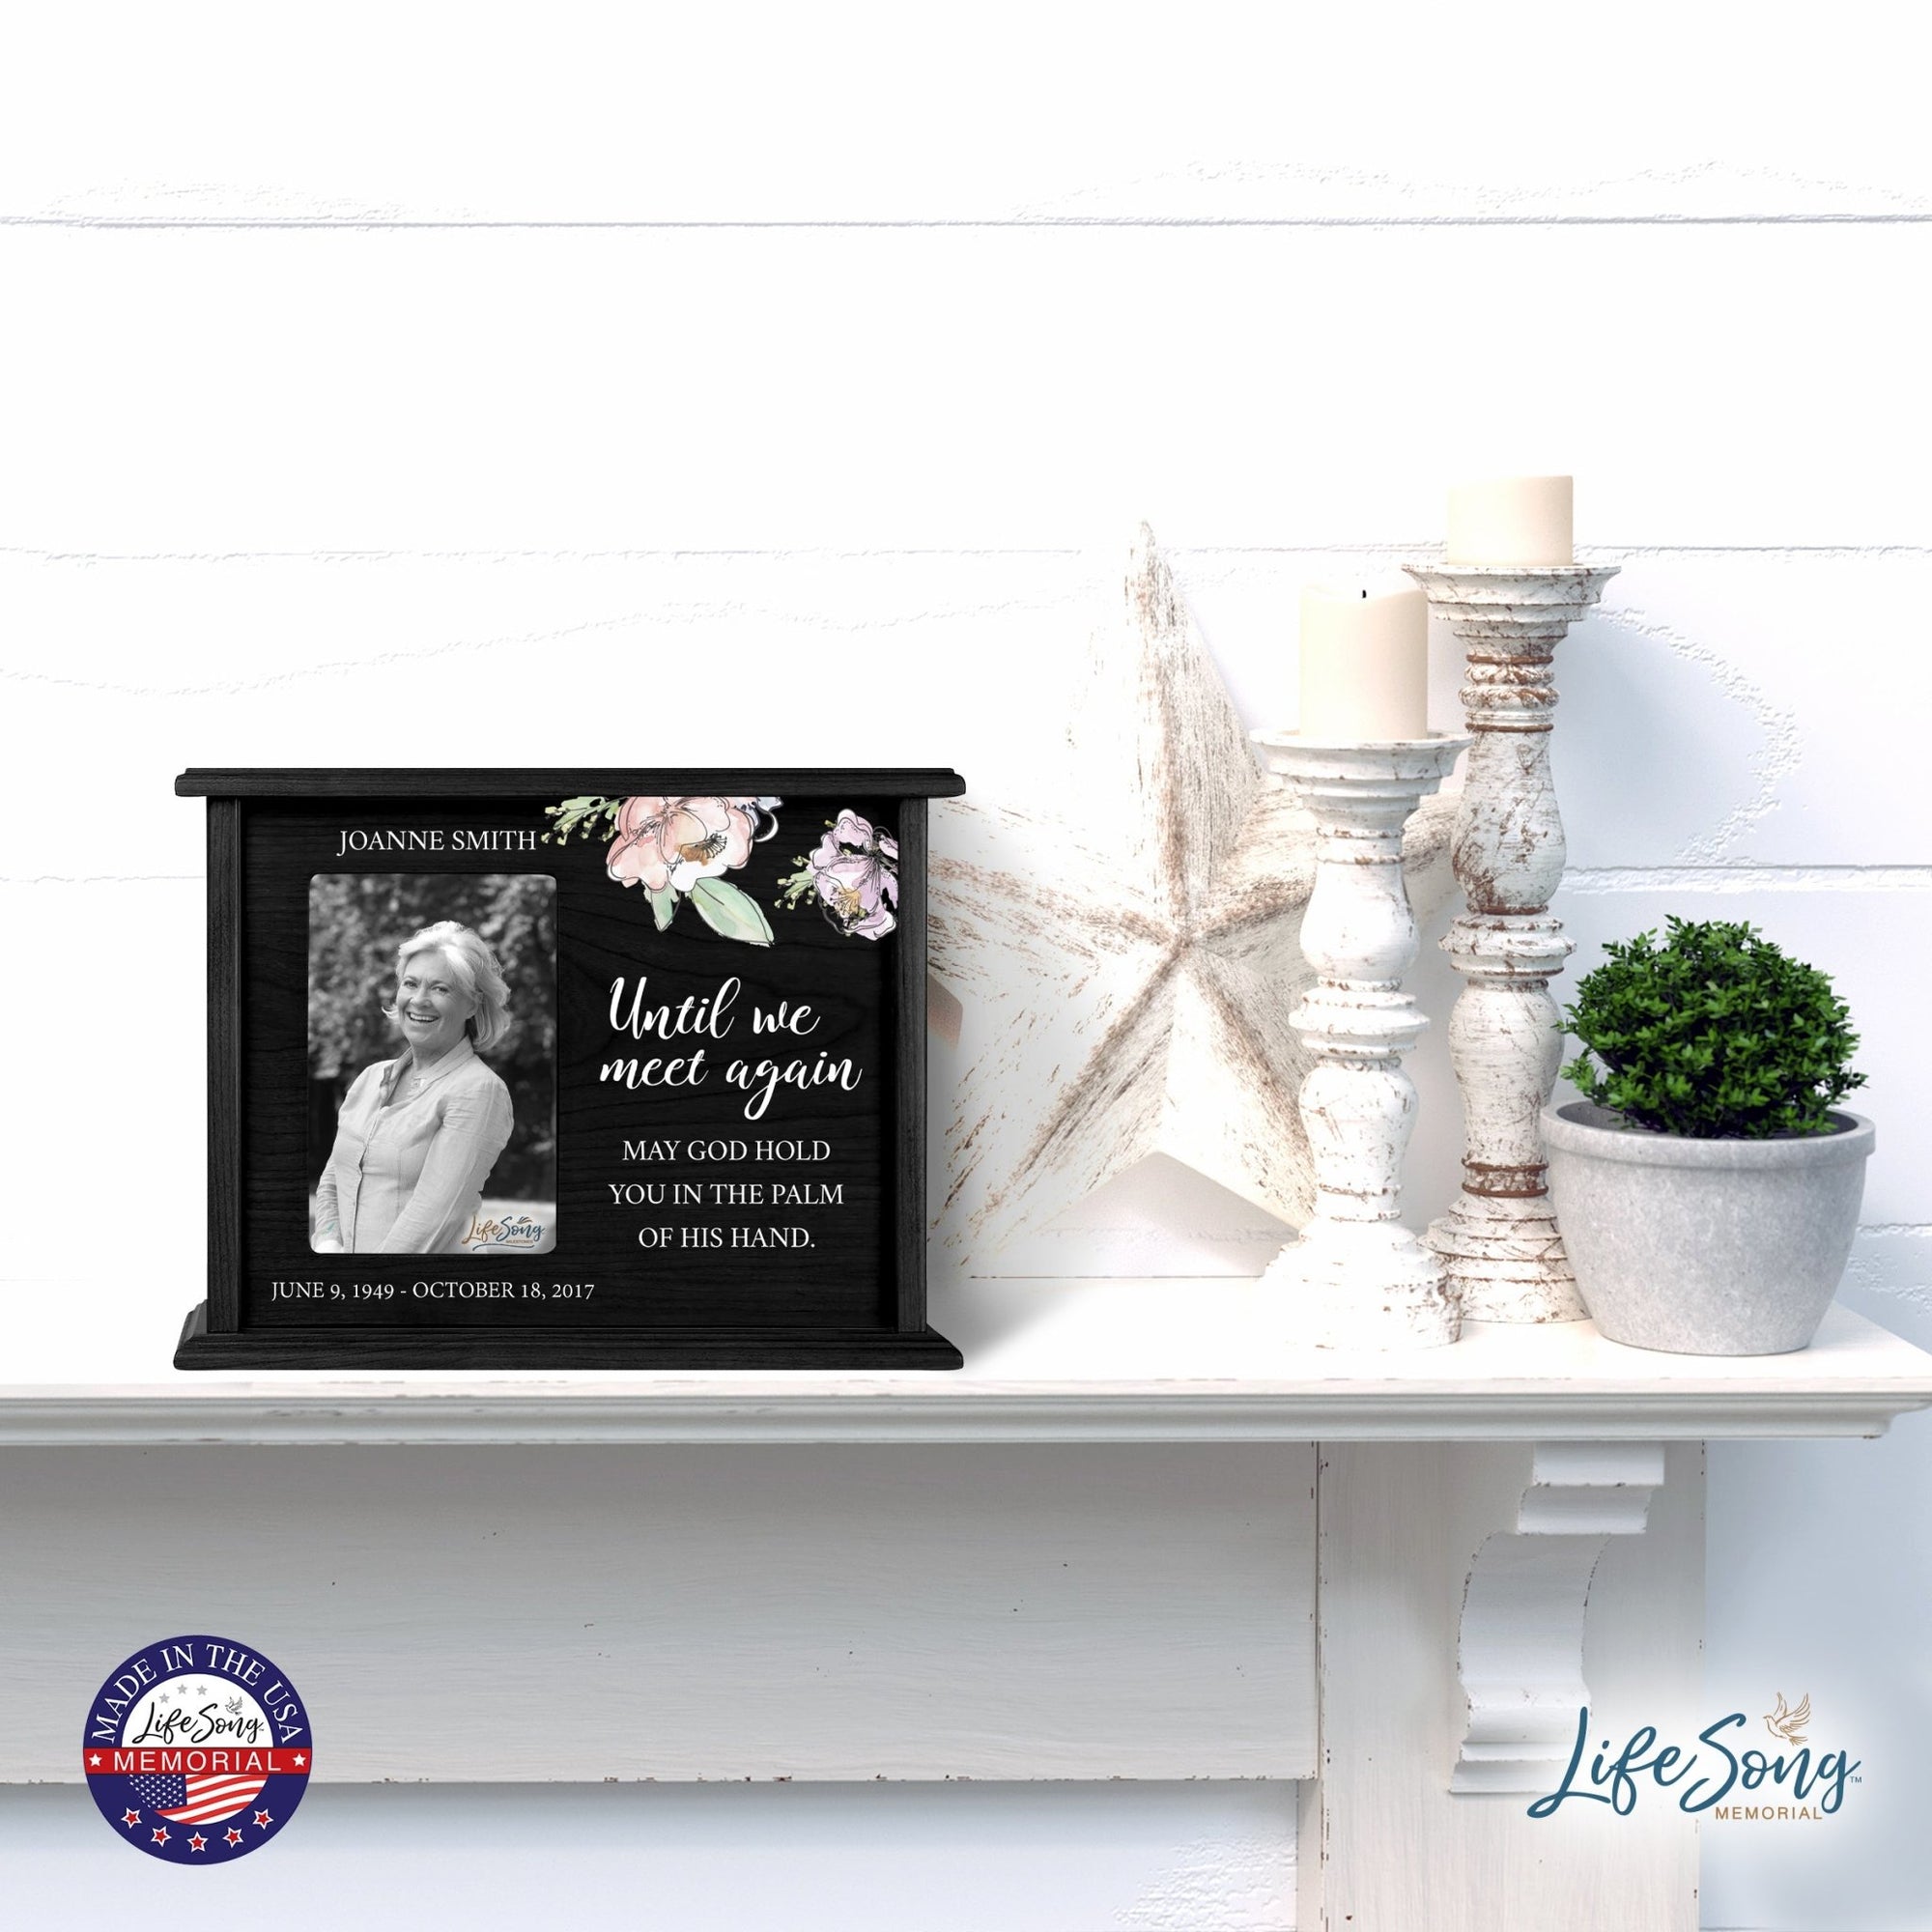 Customized Cremation Urn Box For Human Ashes with Picture Frame holds 4x6 photo| Wooden Funeral Keepsake holds 200 cu in of Ashes | Until We Meet Again - LifeSong Milestones